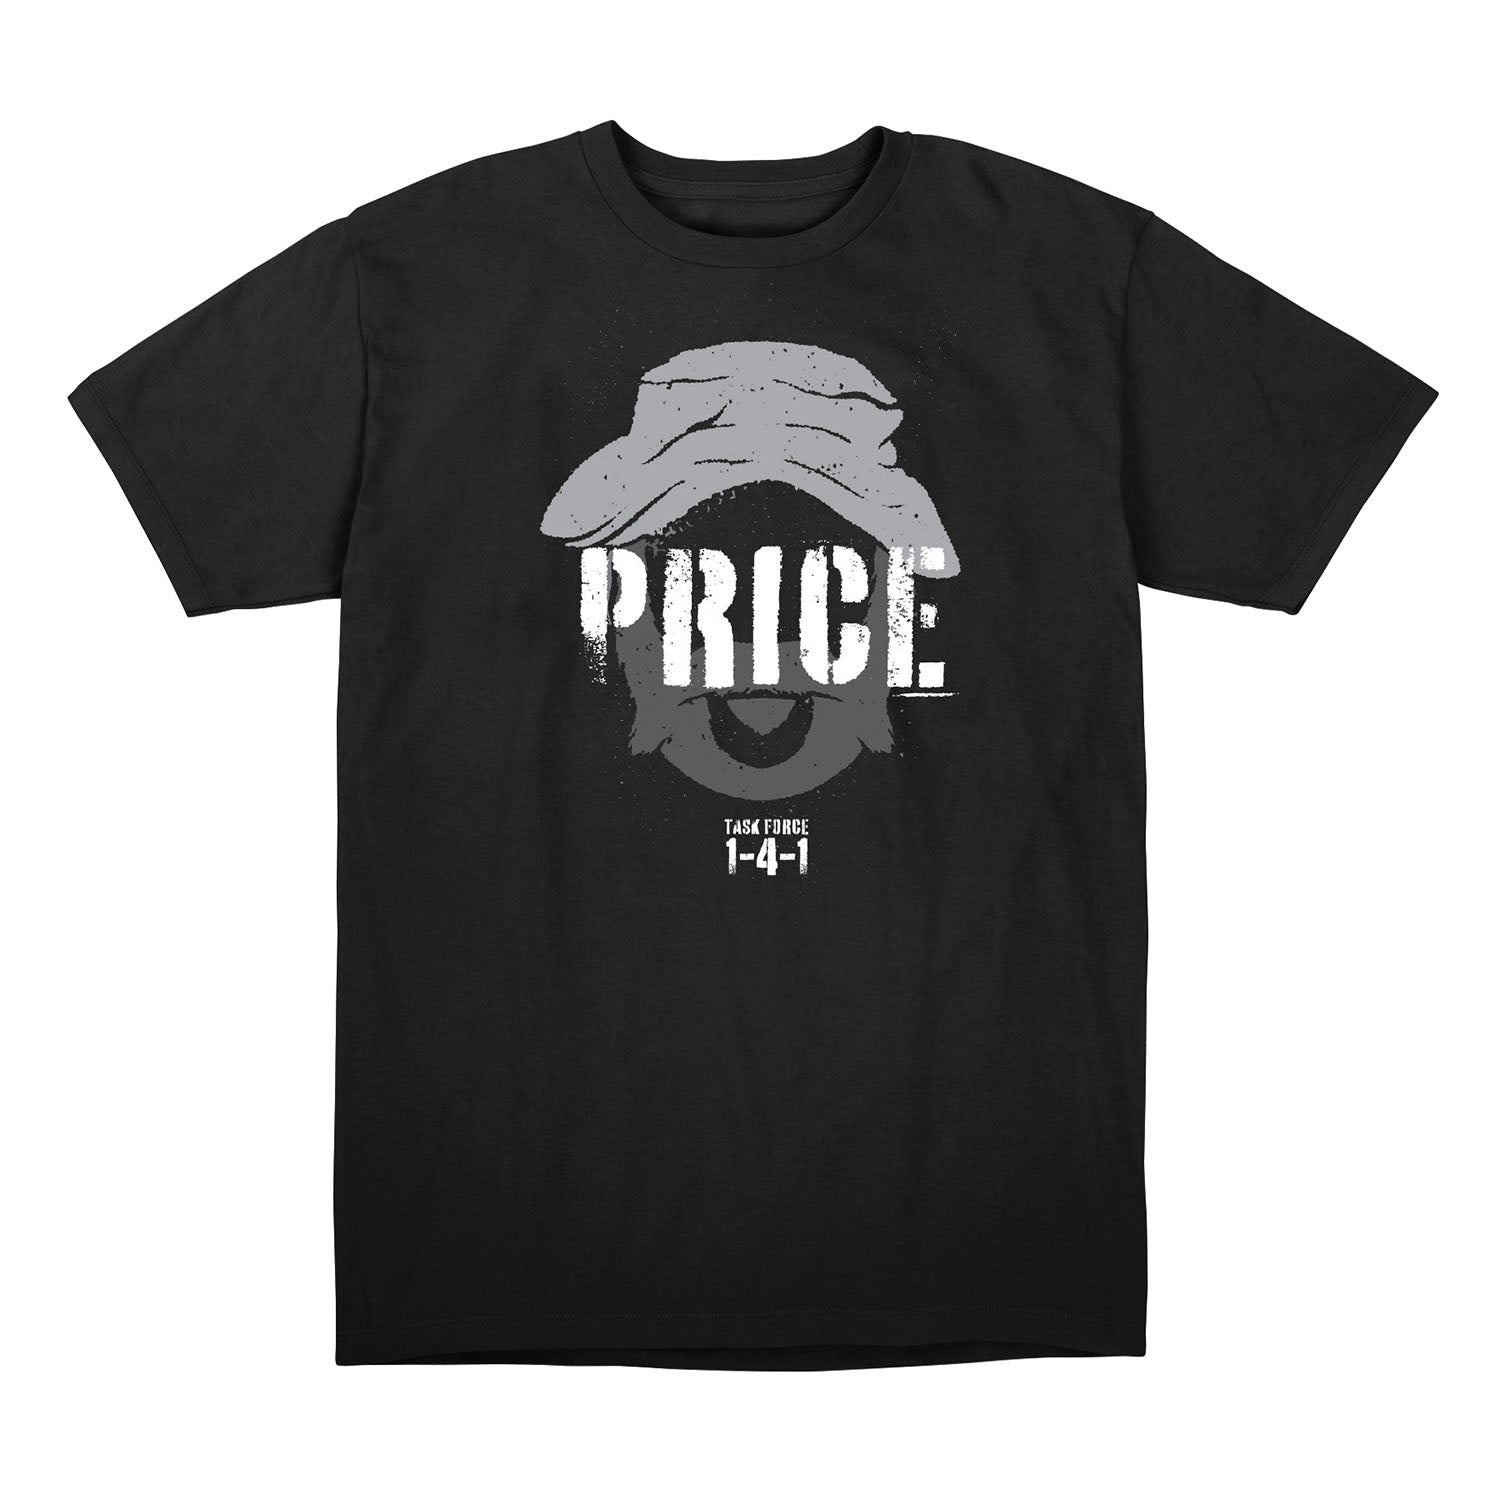 Call of Duty Black Price Silhouette T-Shirt - Front View